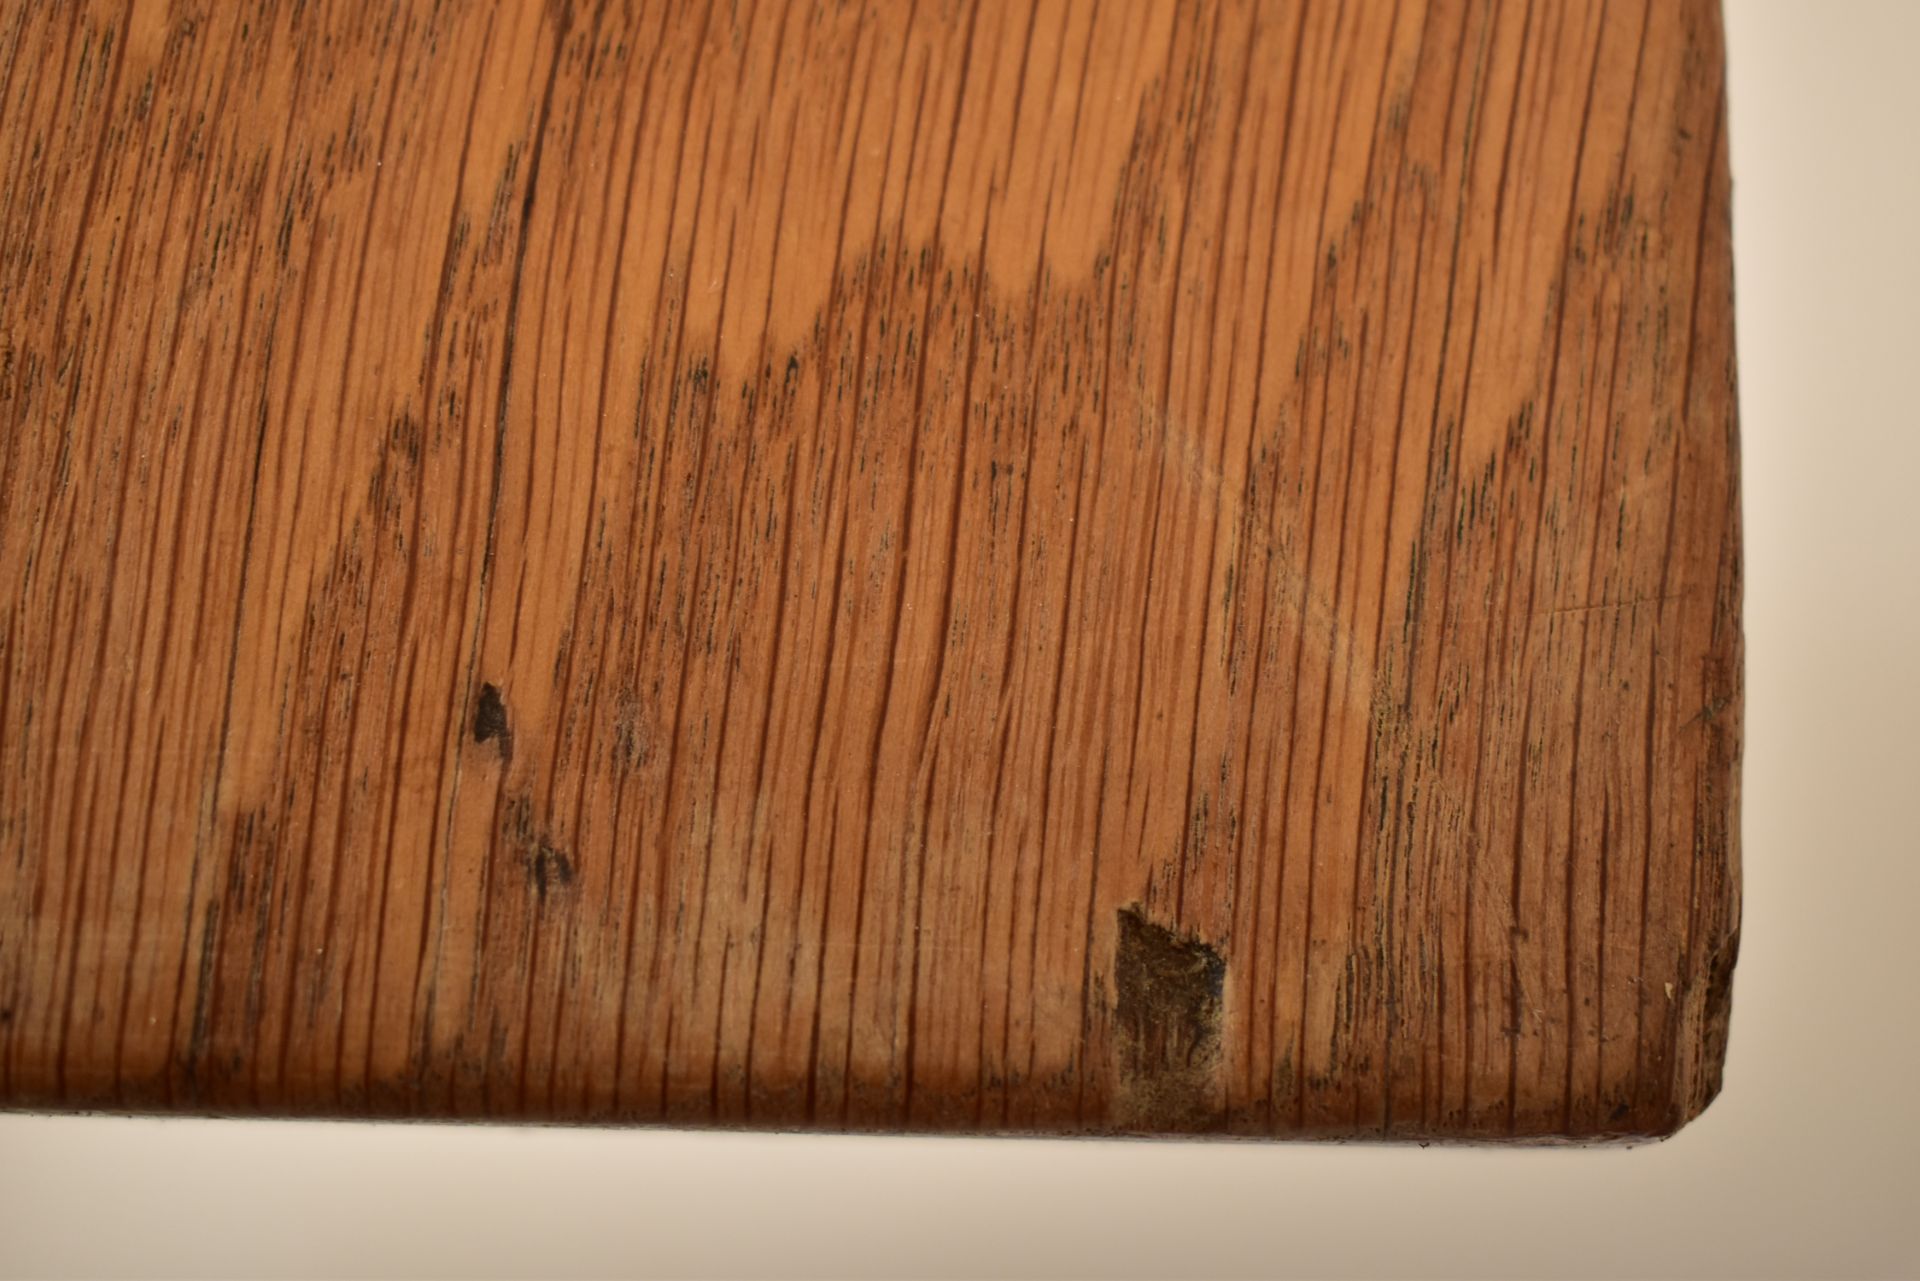 LARGE 20TH CENTURY SOLID ELM REFECTORY DINING TABLE - Image 5 of 5